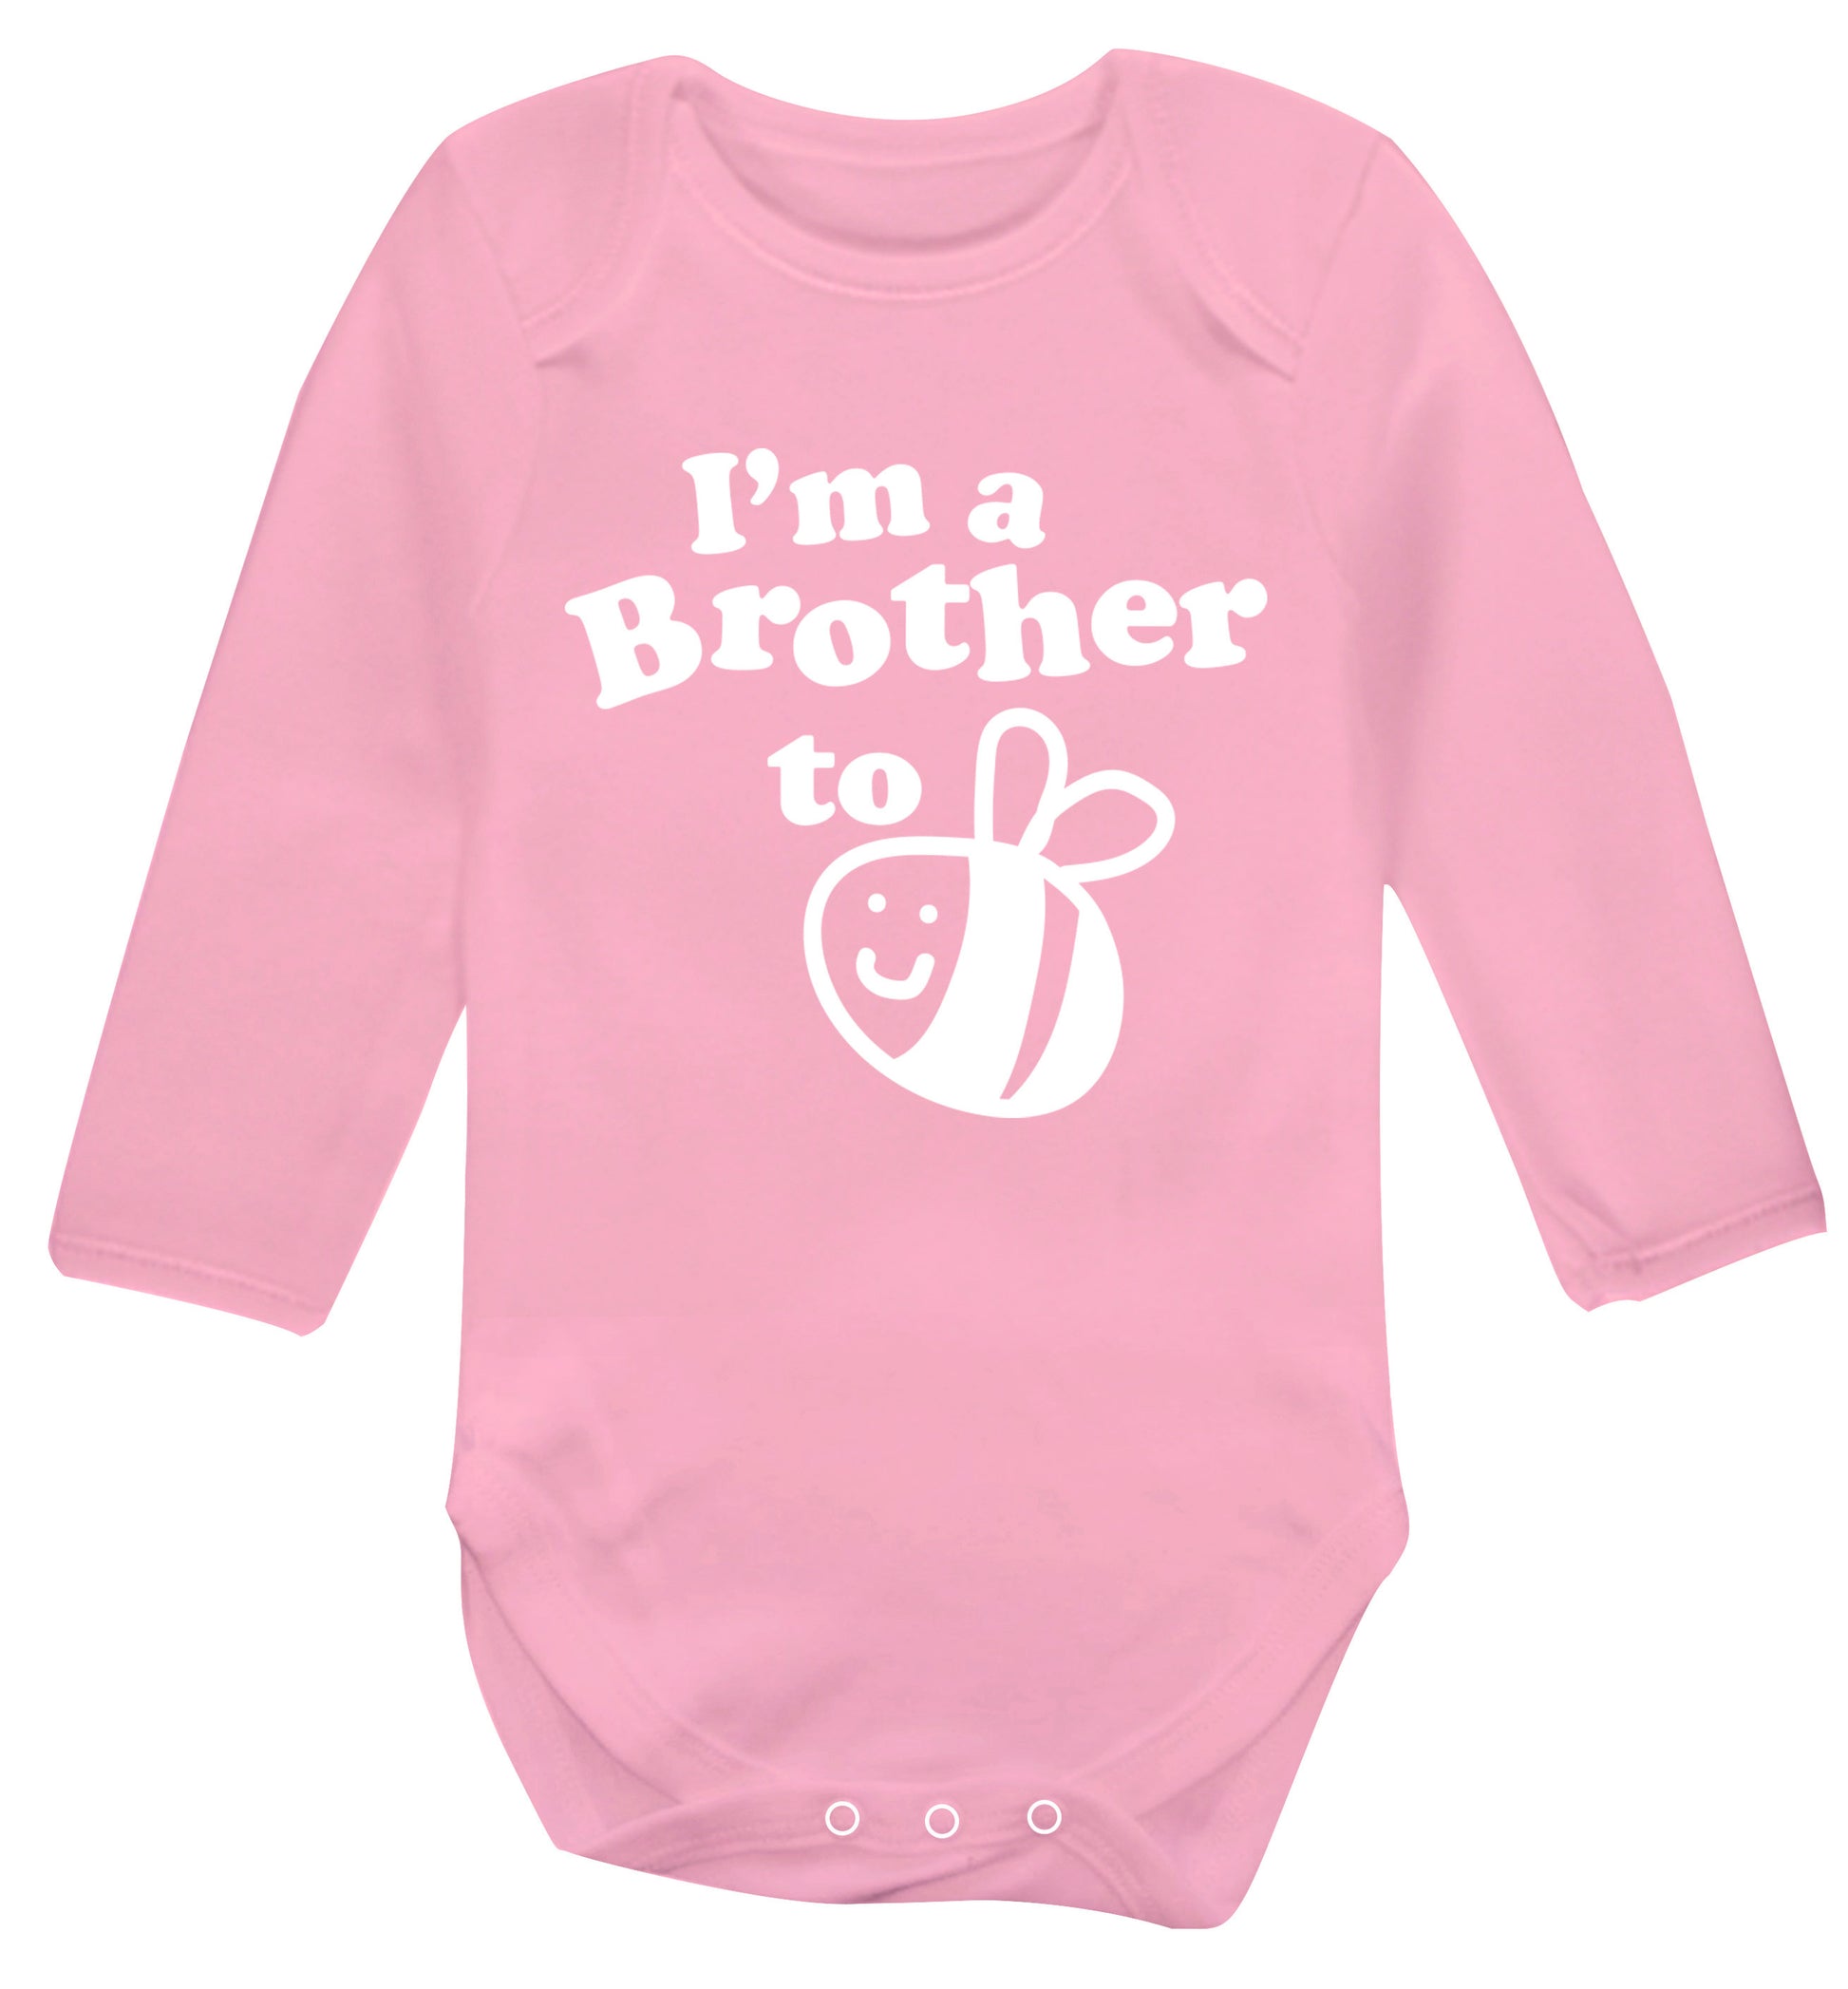 I'm a brother to be Baby Vest long sleeved pale pink 6-12 months